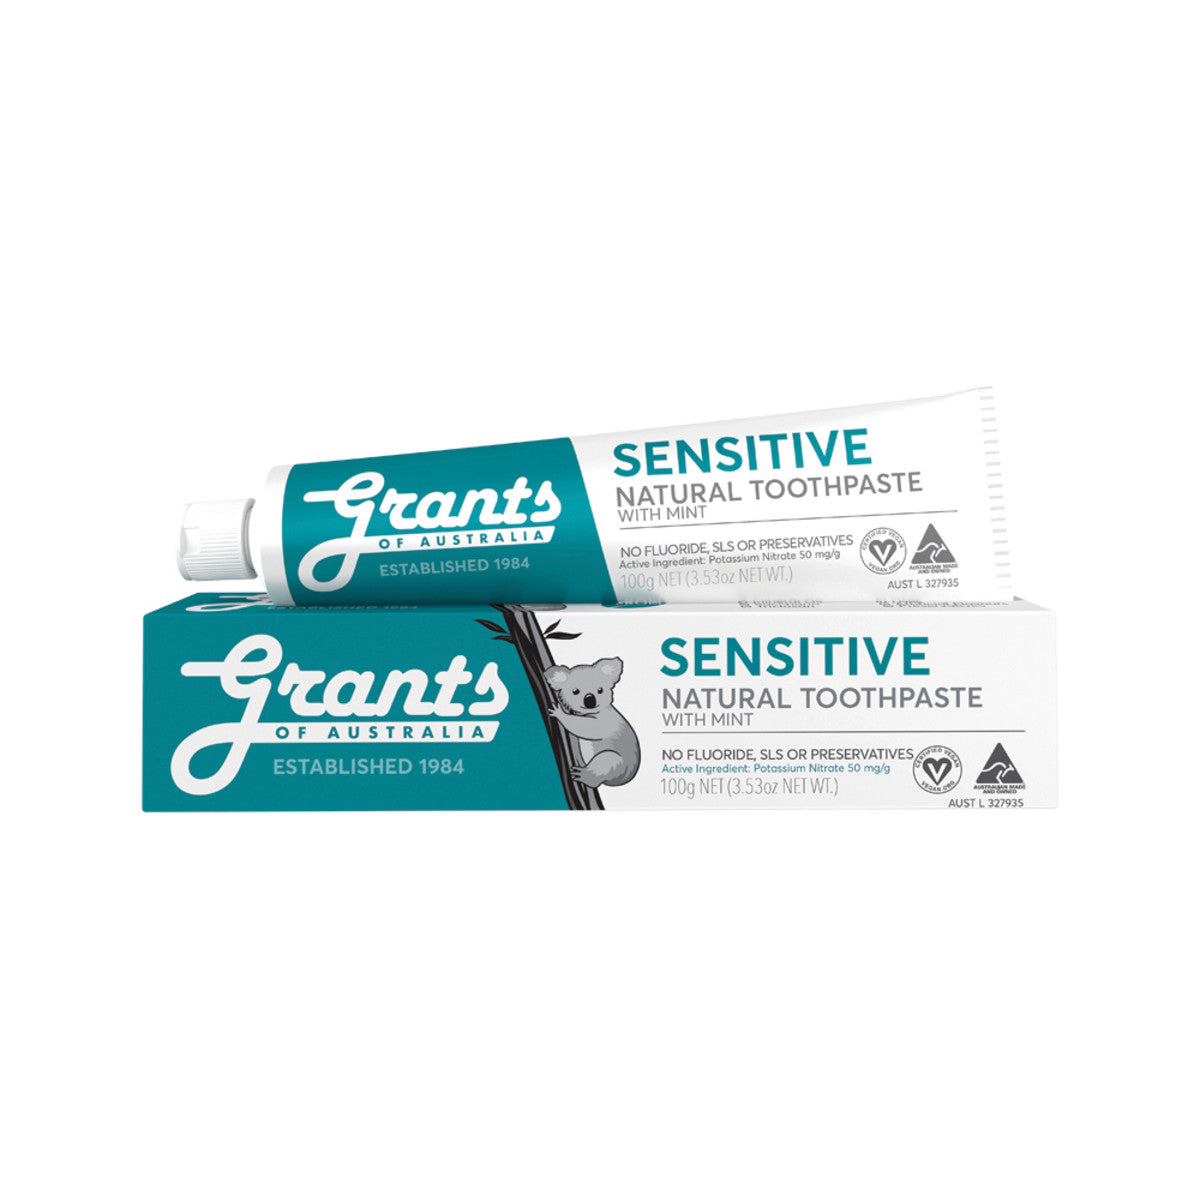 Grants - Natural Toothpaste (Sensitive with Mint)